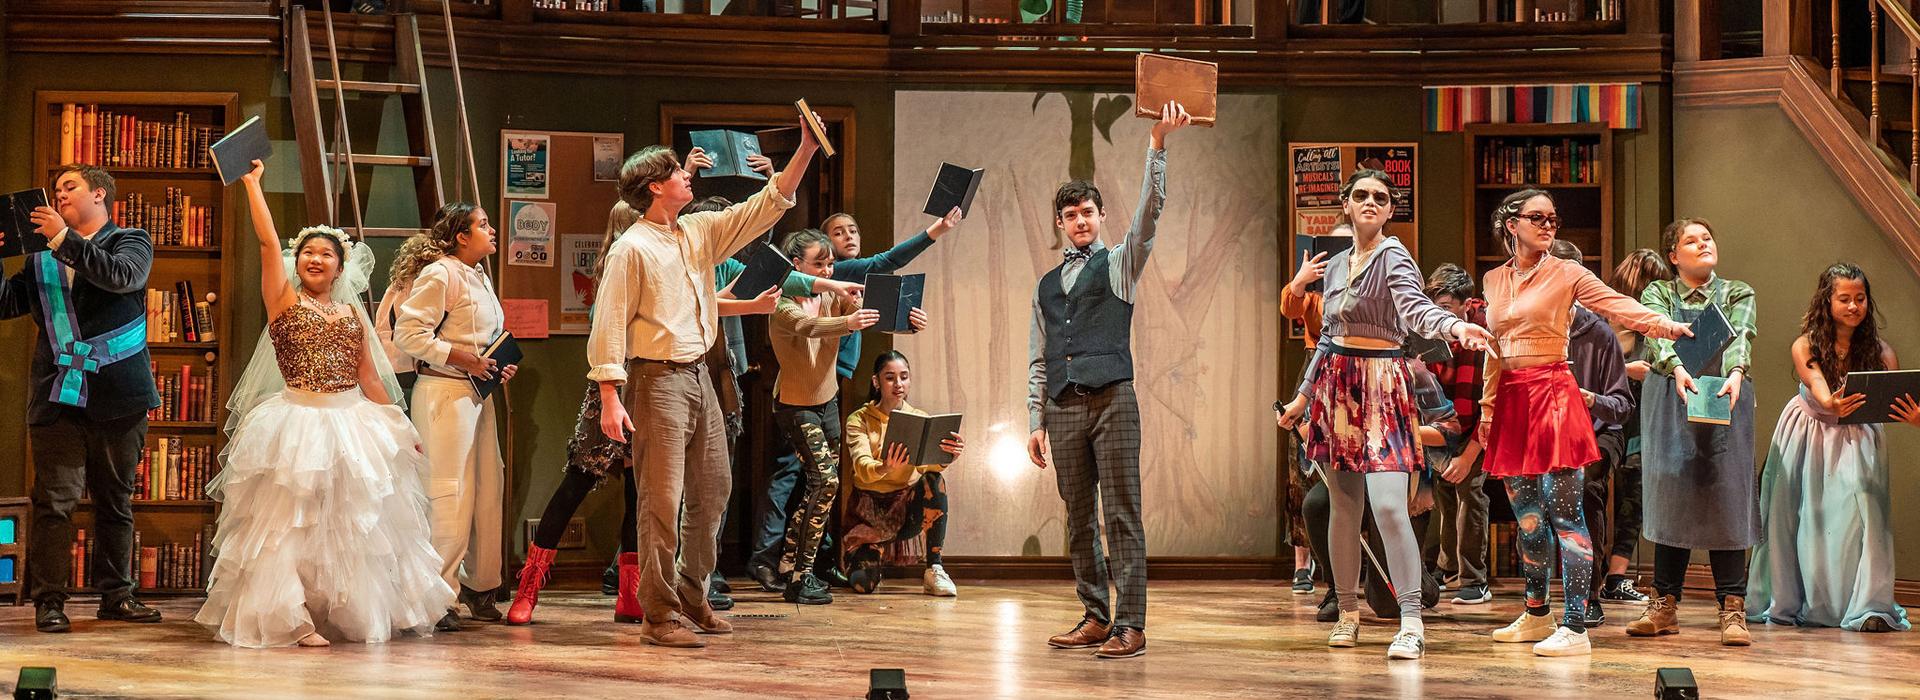 The cast of Into the Woods stands staggered on the Spriet Stage holding books triumphantly in the air. The background set emulates a library and a large plant bean stock grows in the back middle. Photo by Dahlia Katz.